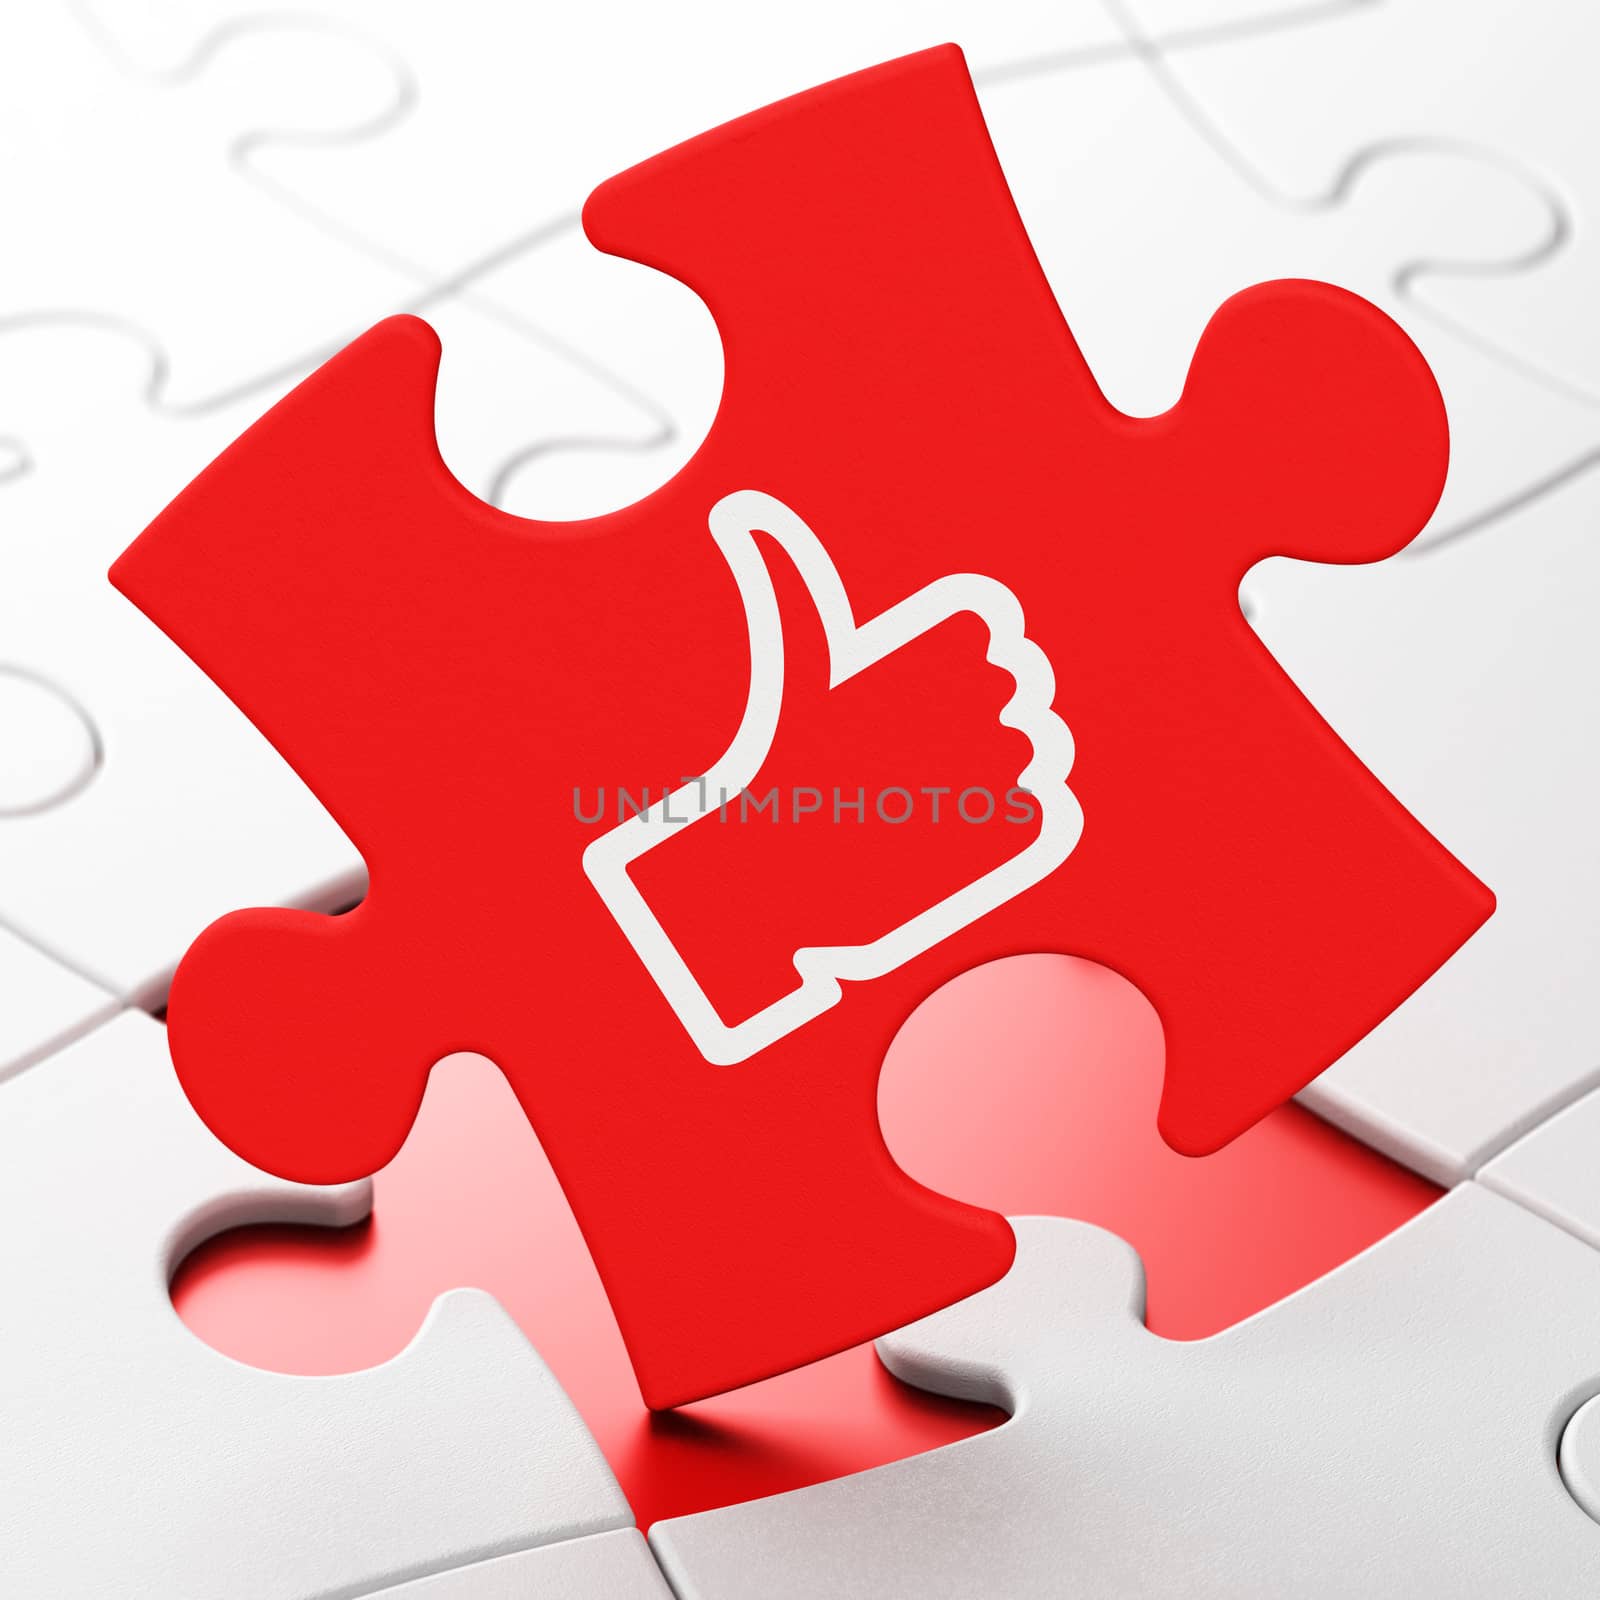 Social network concept: Thumb Up on Red puzzle pieces background, 3d render